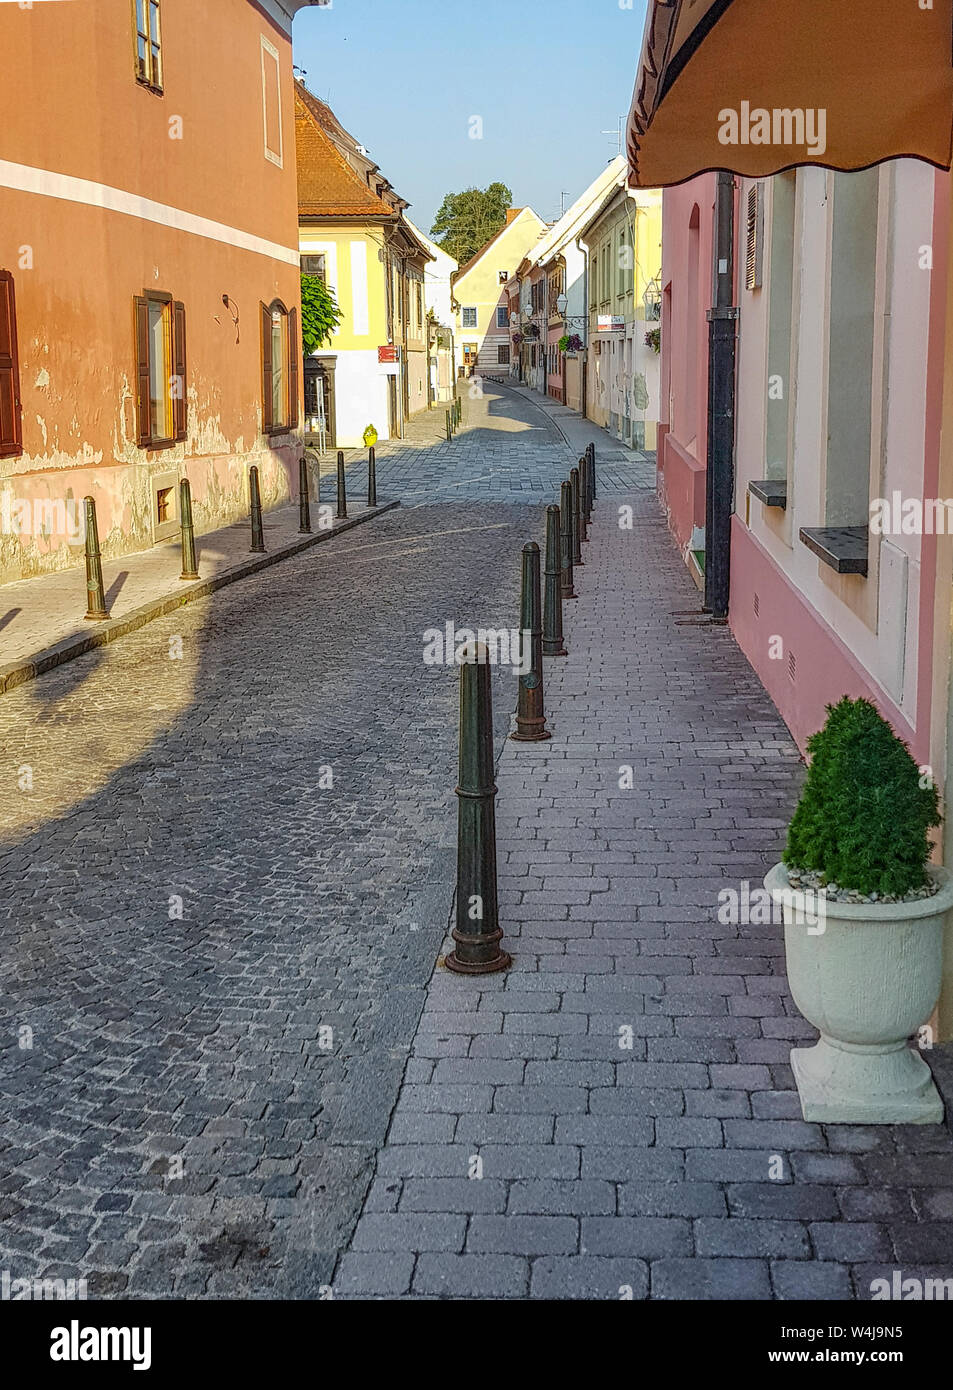 One of manny streets in old part of town Varazdin, Croatia. Town is situated in north-west part of Croatia. Stock Photo